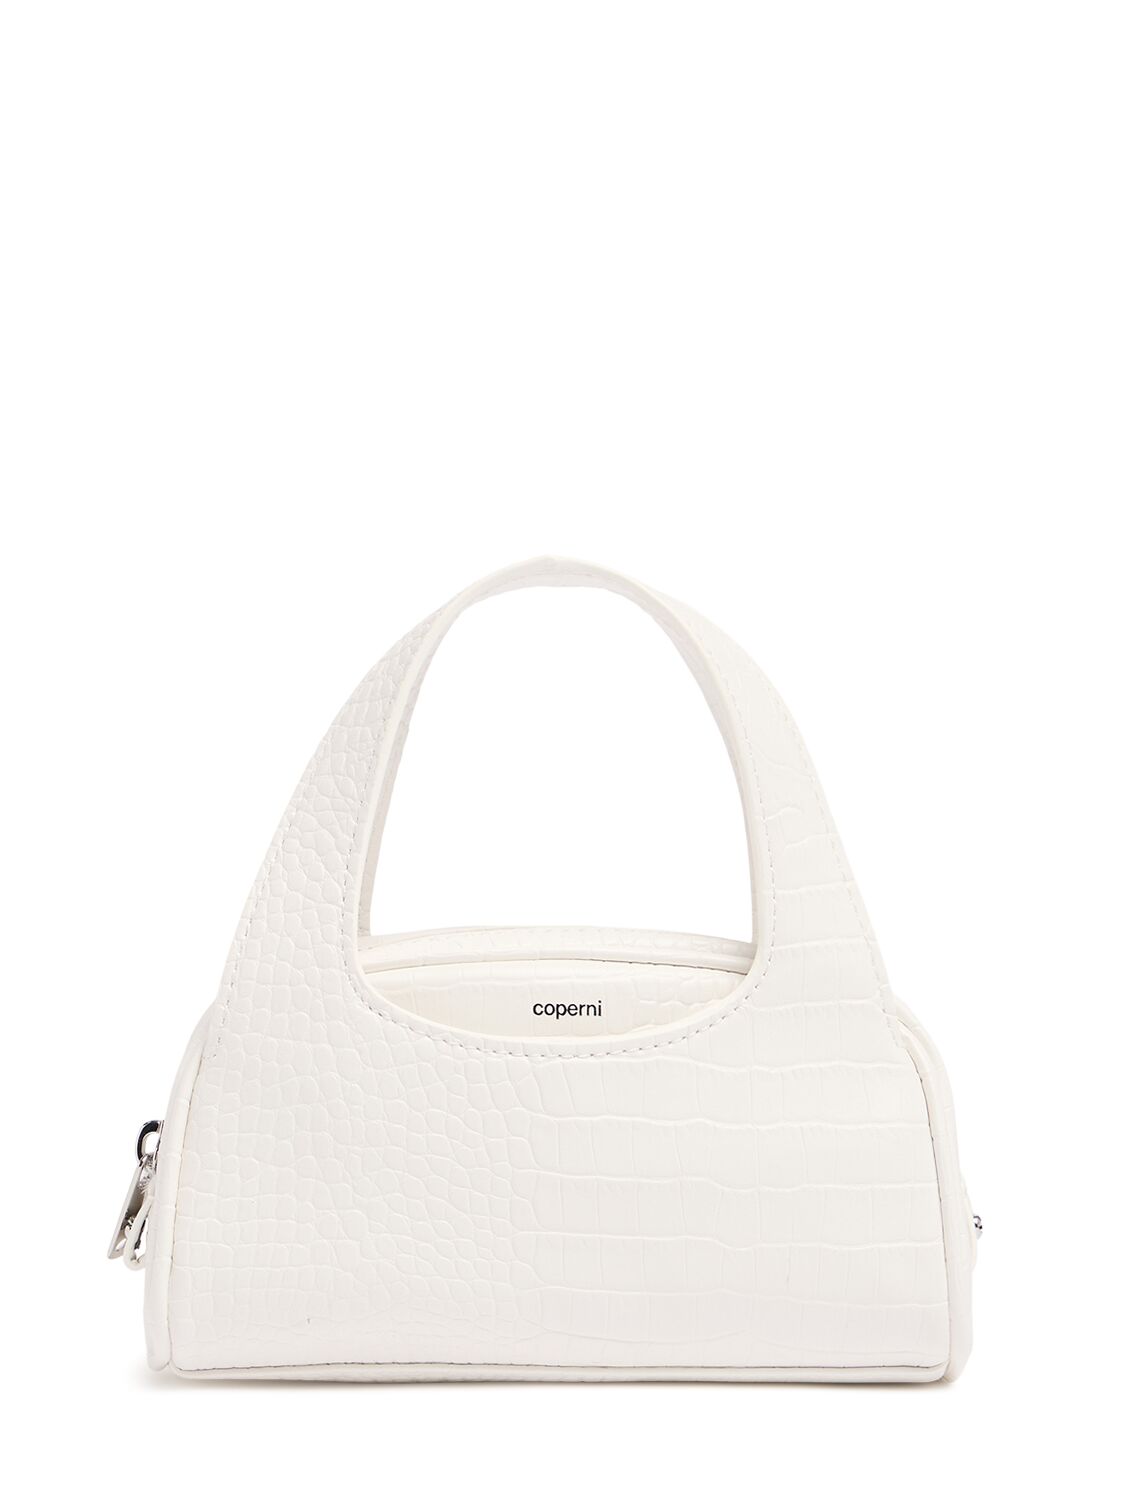 Coperni Small Faux Leather Top Handle Bag In White